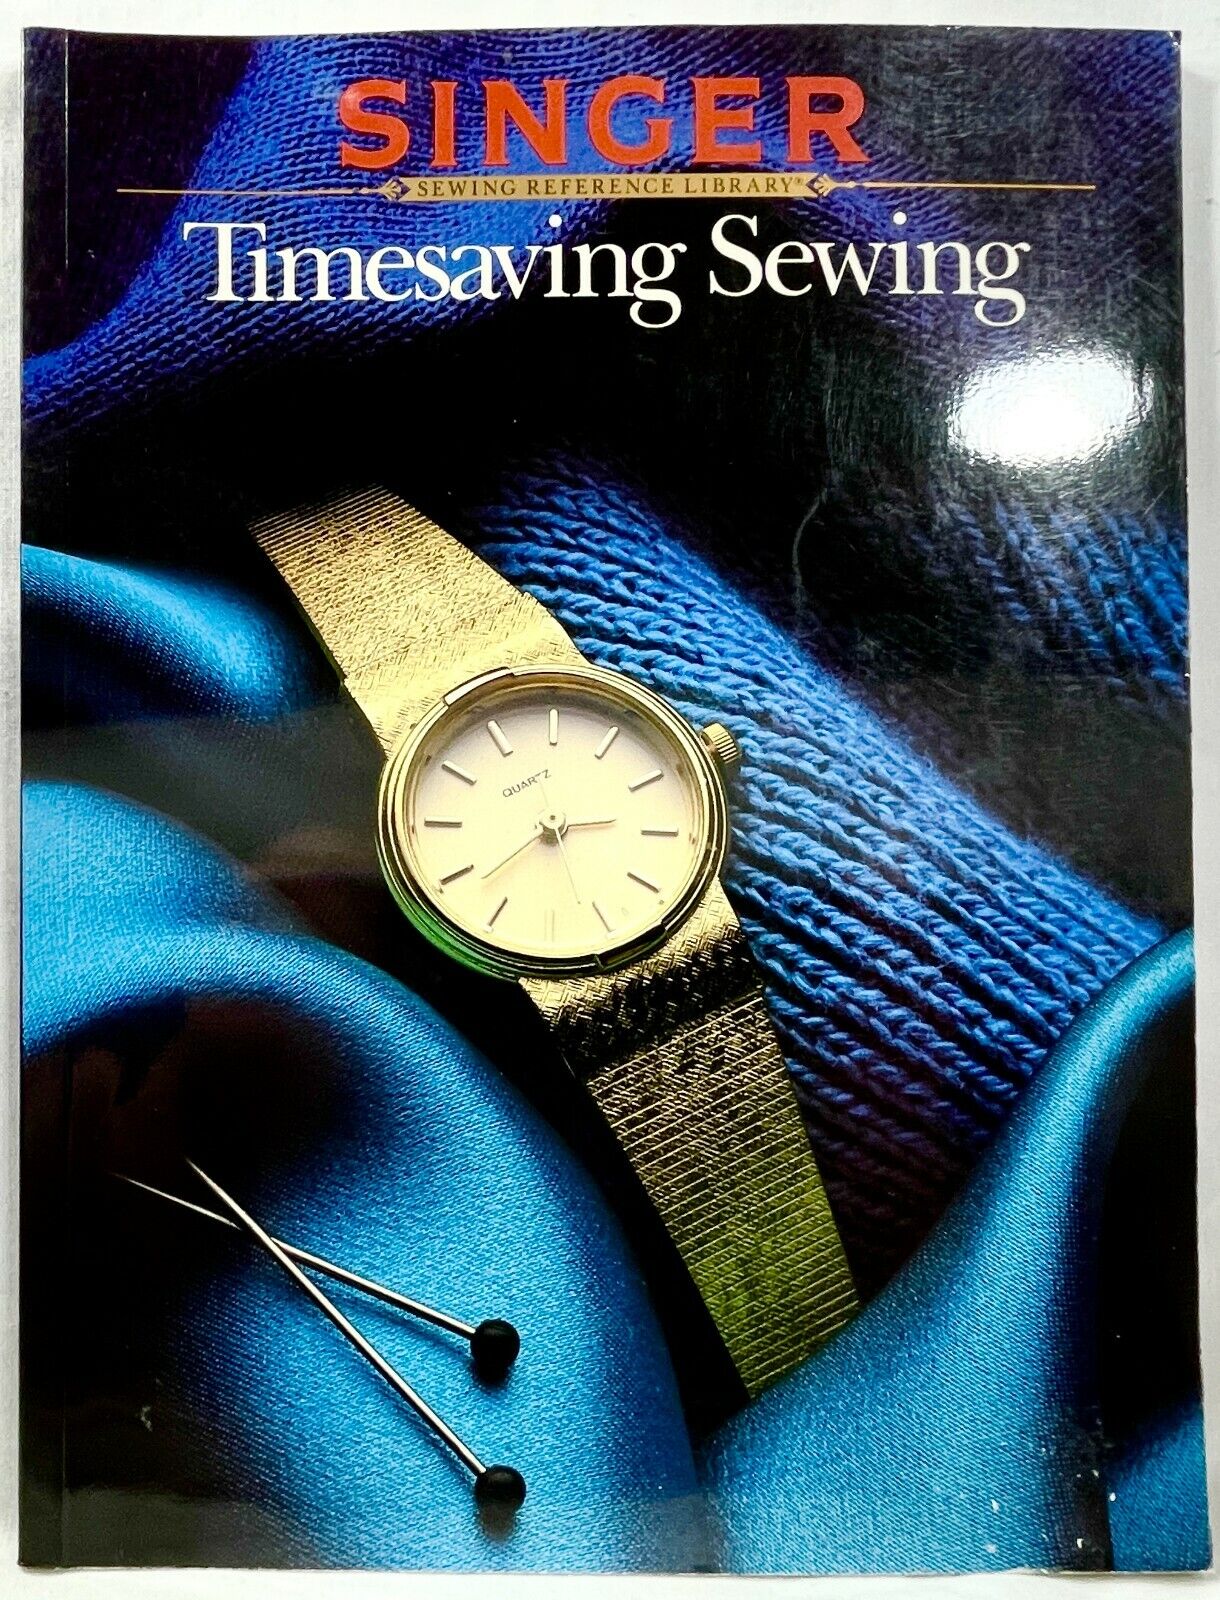 1987 Singer Reference Library Timesaving Sewing Book Manual Instruction Sc 11389